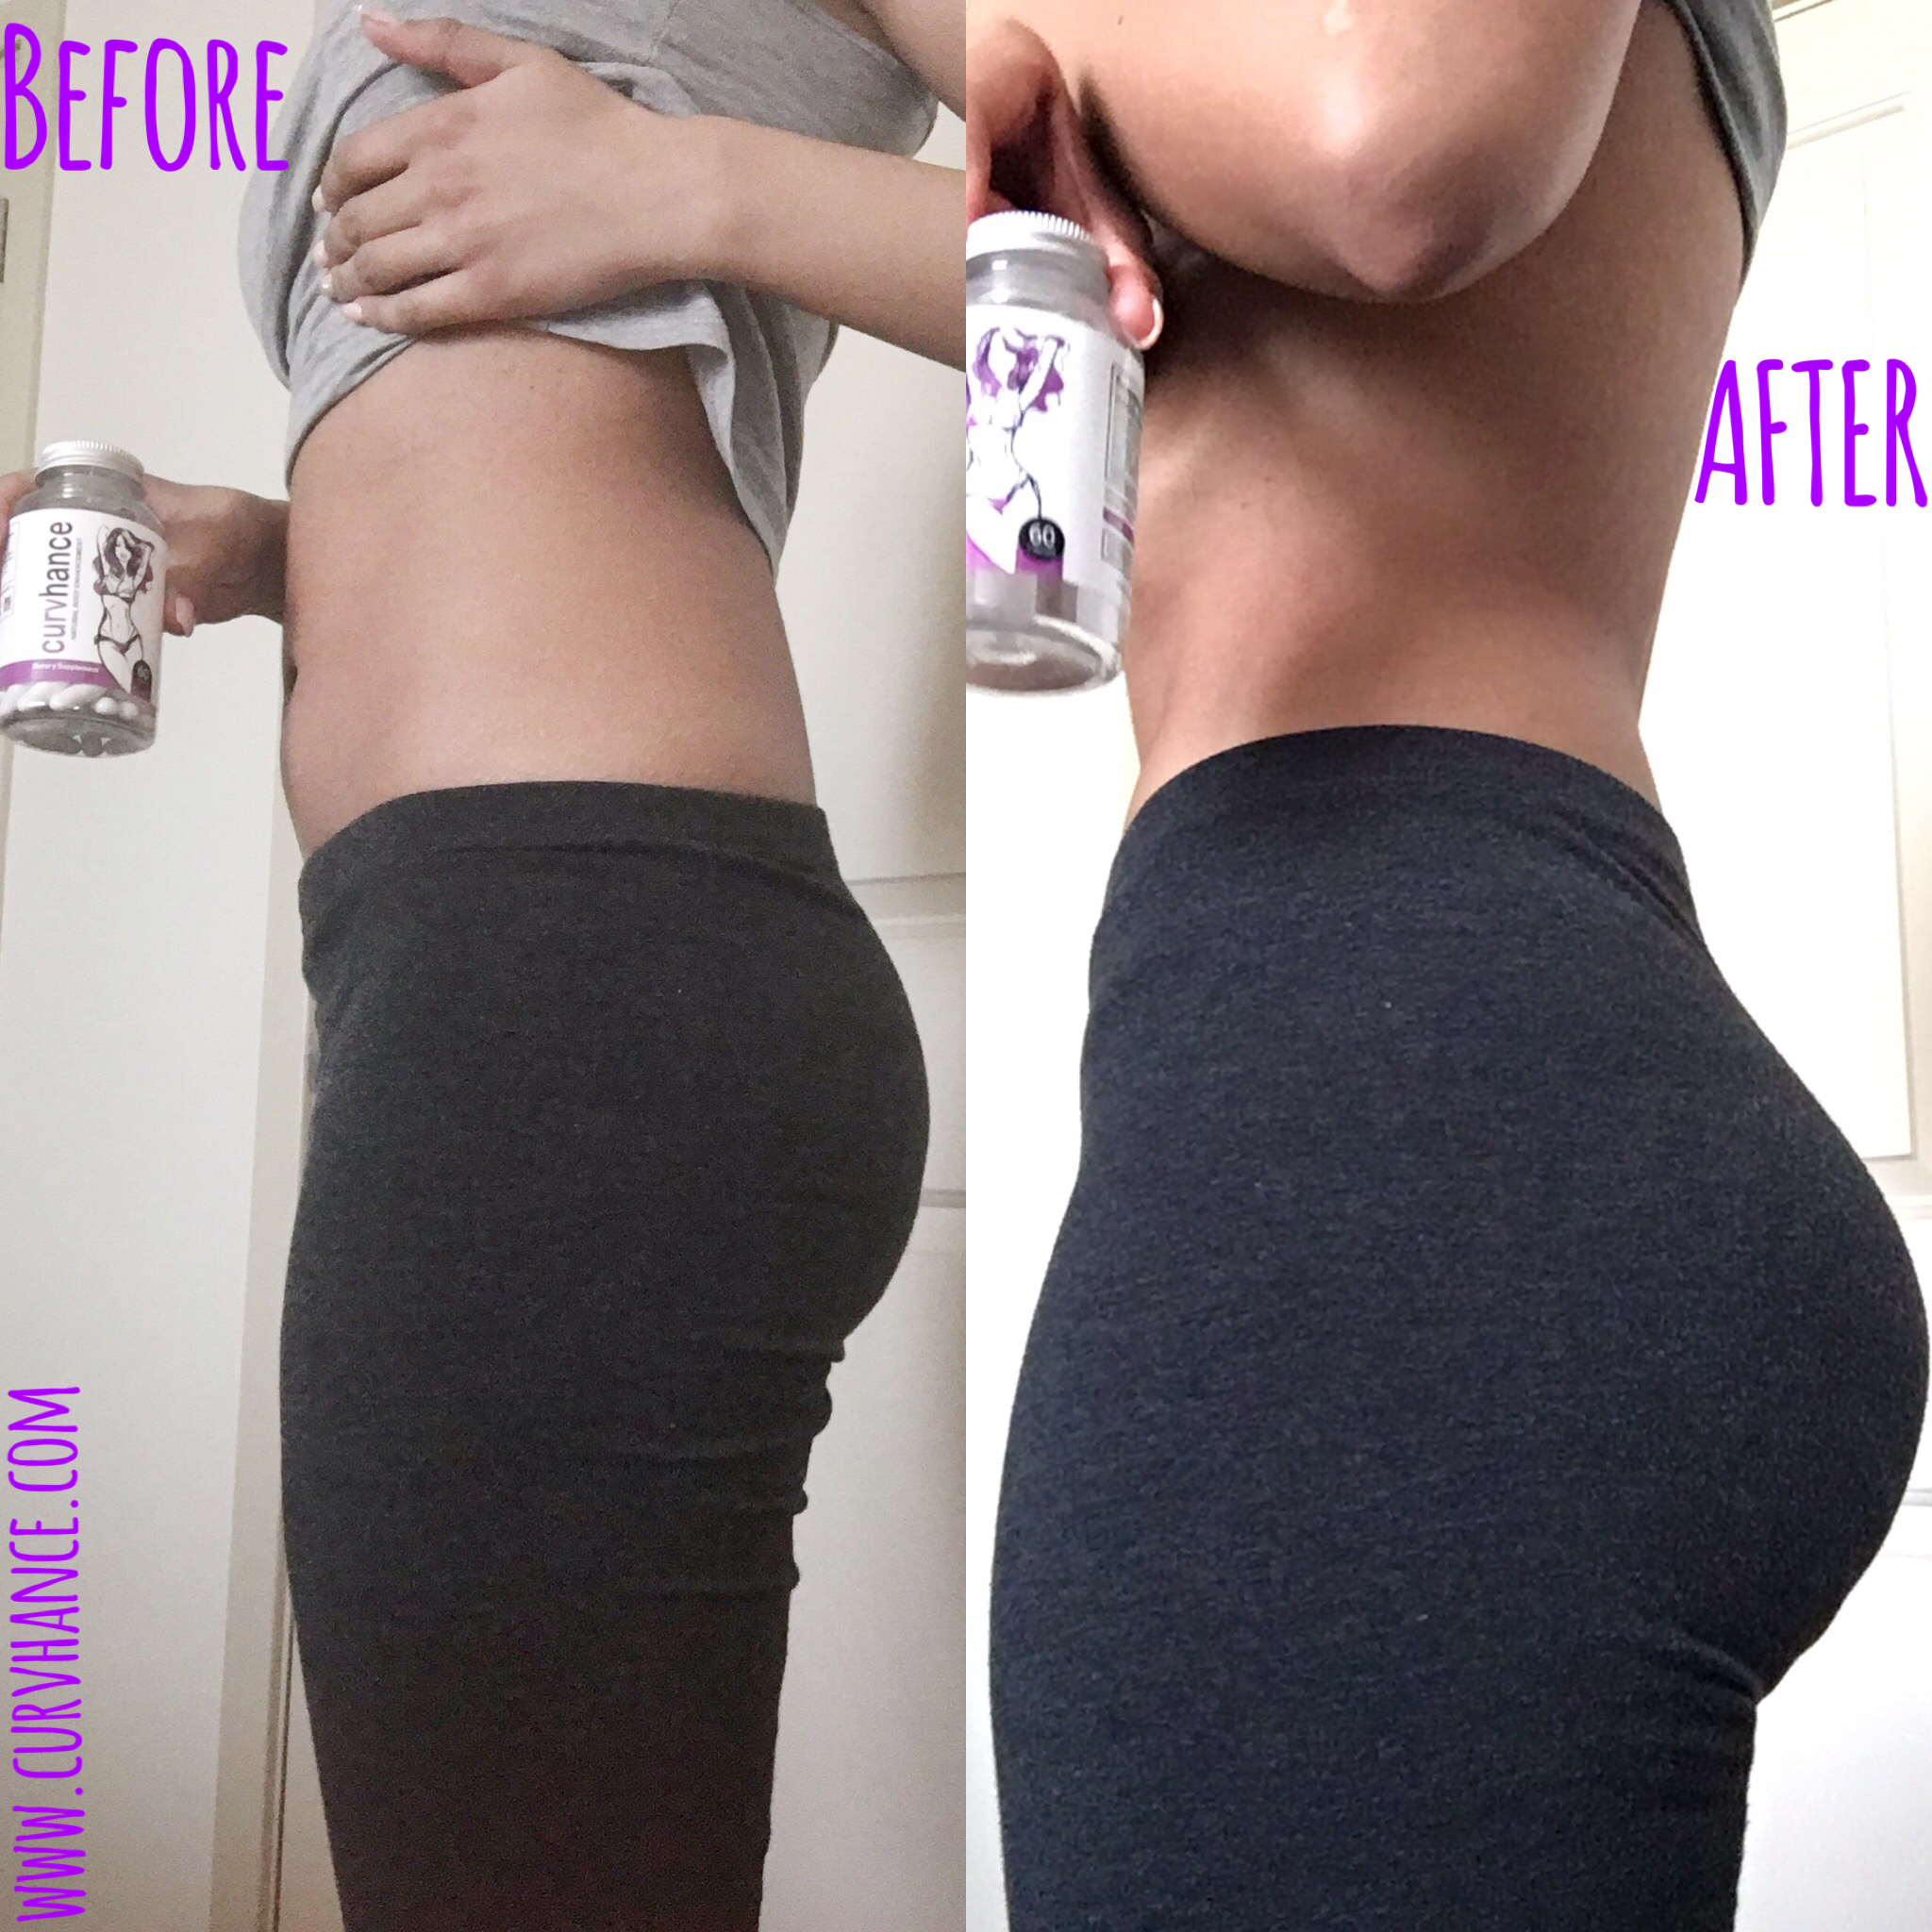 Maria: "My body transformation update after using Curvhance for 3 mont...